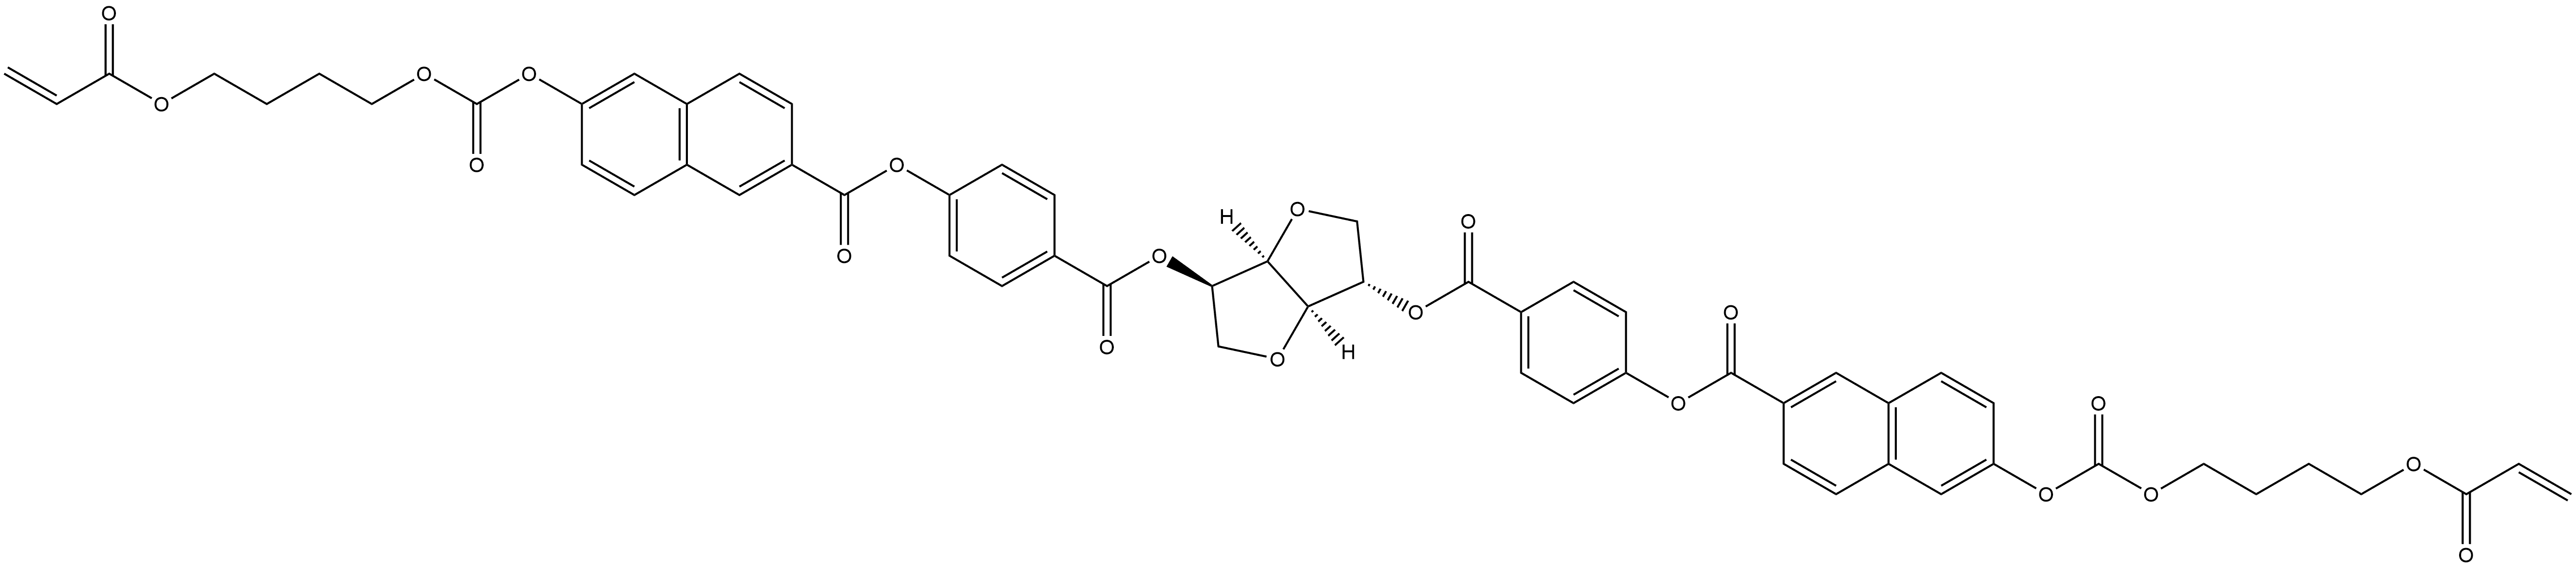 D-Glucitol, 1,4:3,6-dianhydro-, 2,5-bis[4-[[[6-[[[4-[(1-oxo-2-propen-1-yl)oxy]butoxy]carbonyl]oxy]-2-naphthalenyl]carbonyl]oxy]benzoate] 结构式